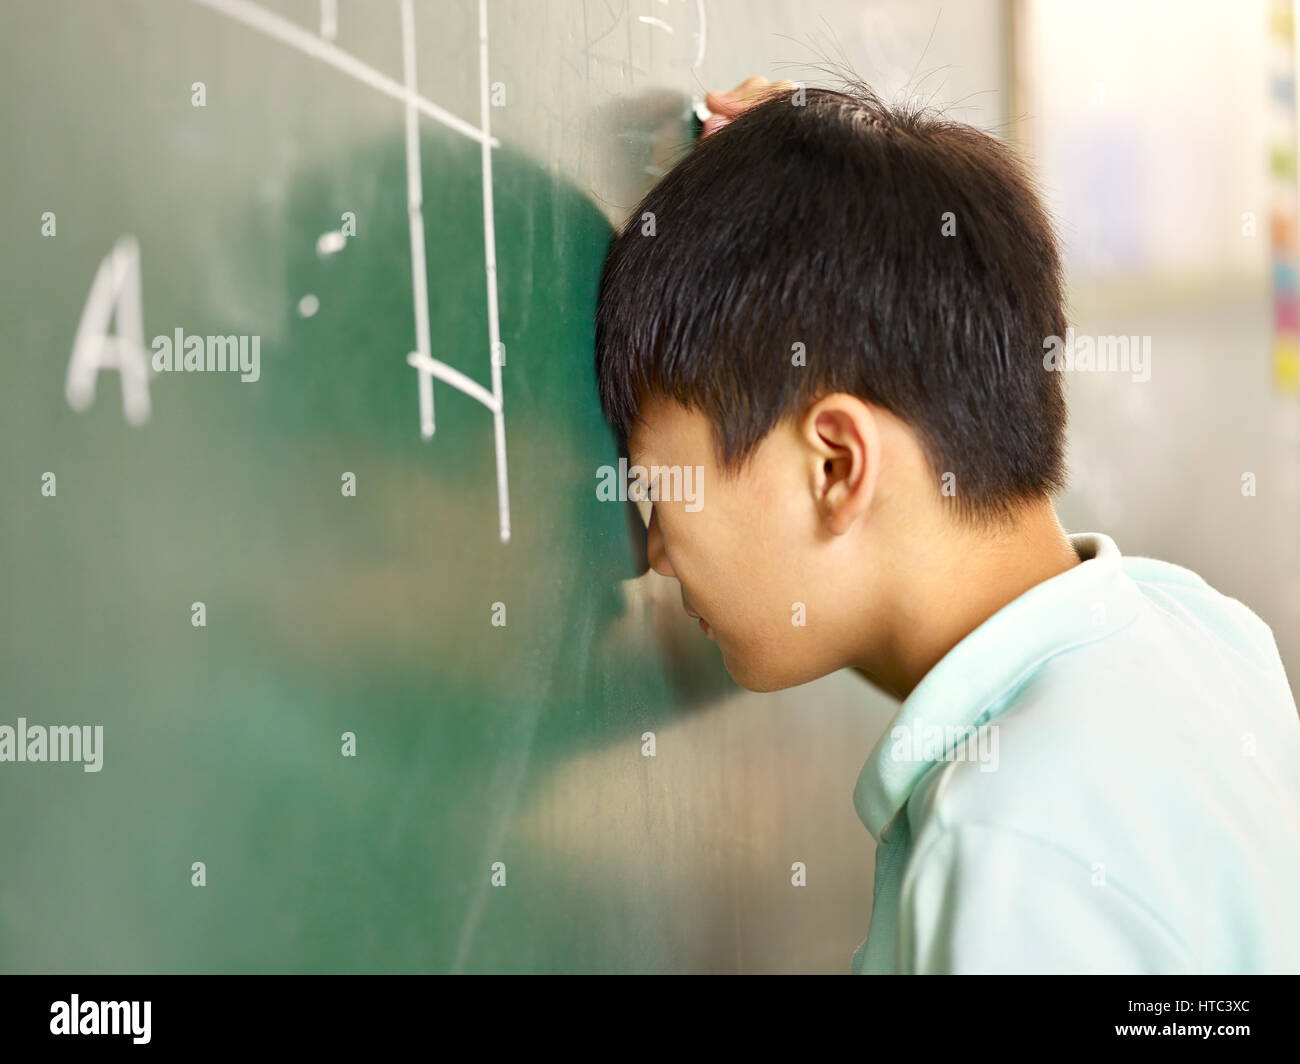 painful asian elementary schoolboy banging his head on blackboard while solving geometry problem. Stock Photo